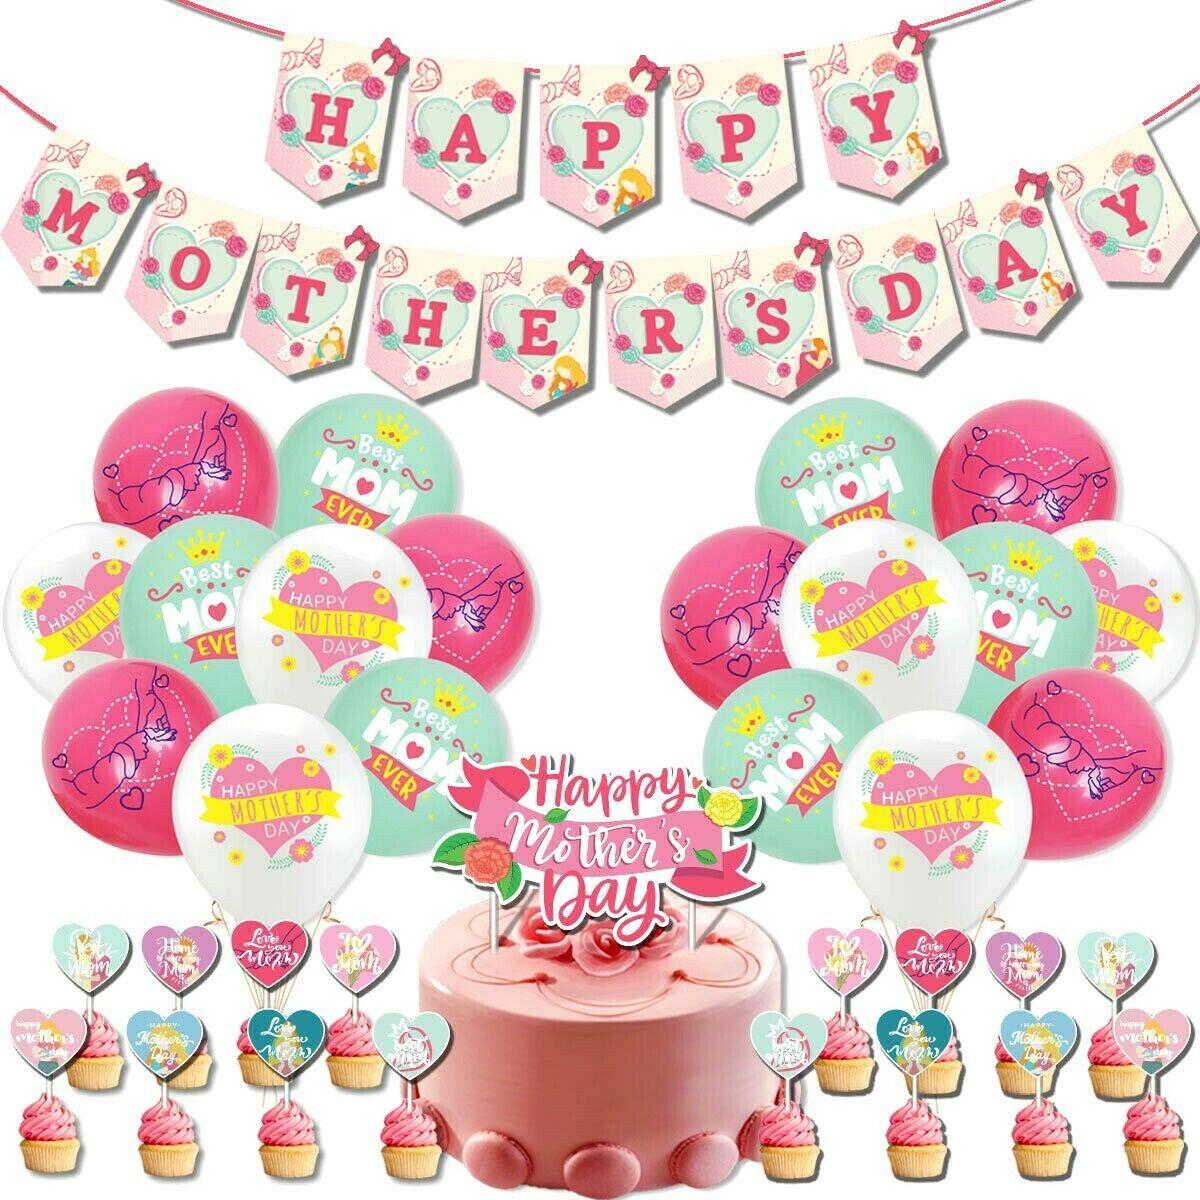 Party Set Mother's Day Party Set Party Supplies Toppers Balloons Best Mum Decoration